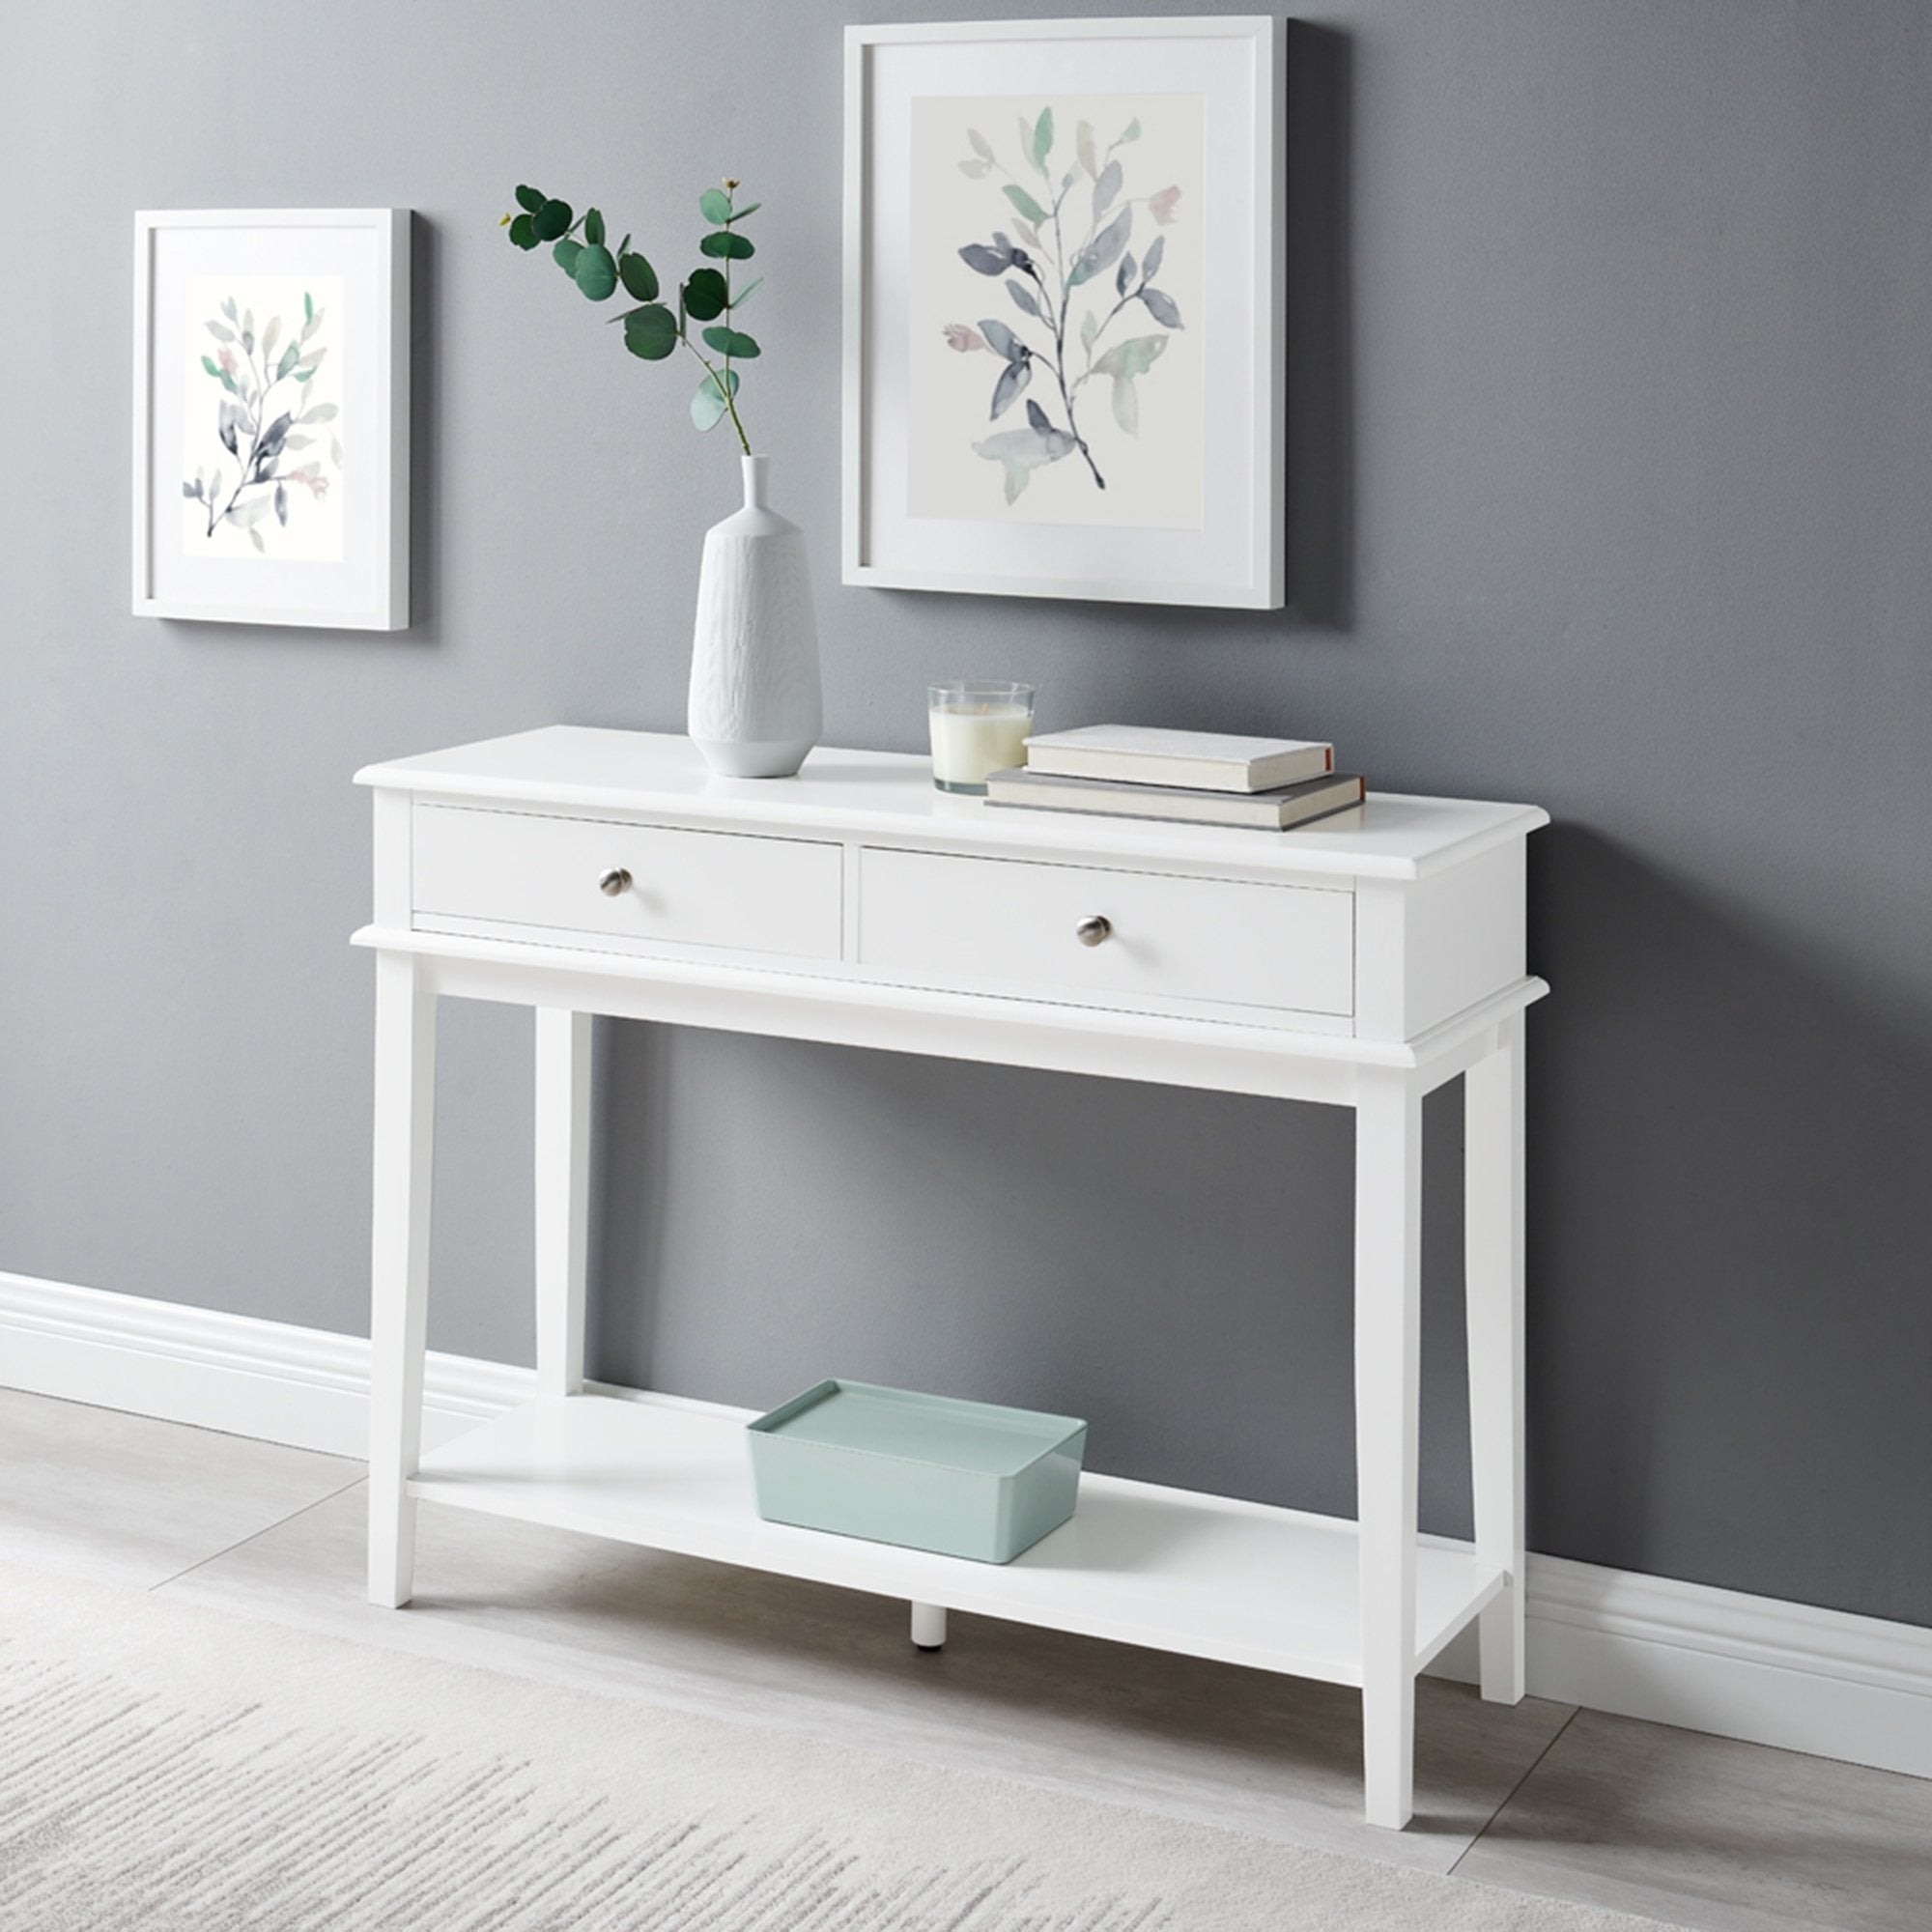 Console Table close to wall